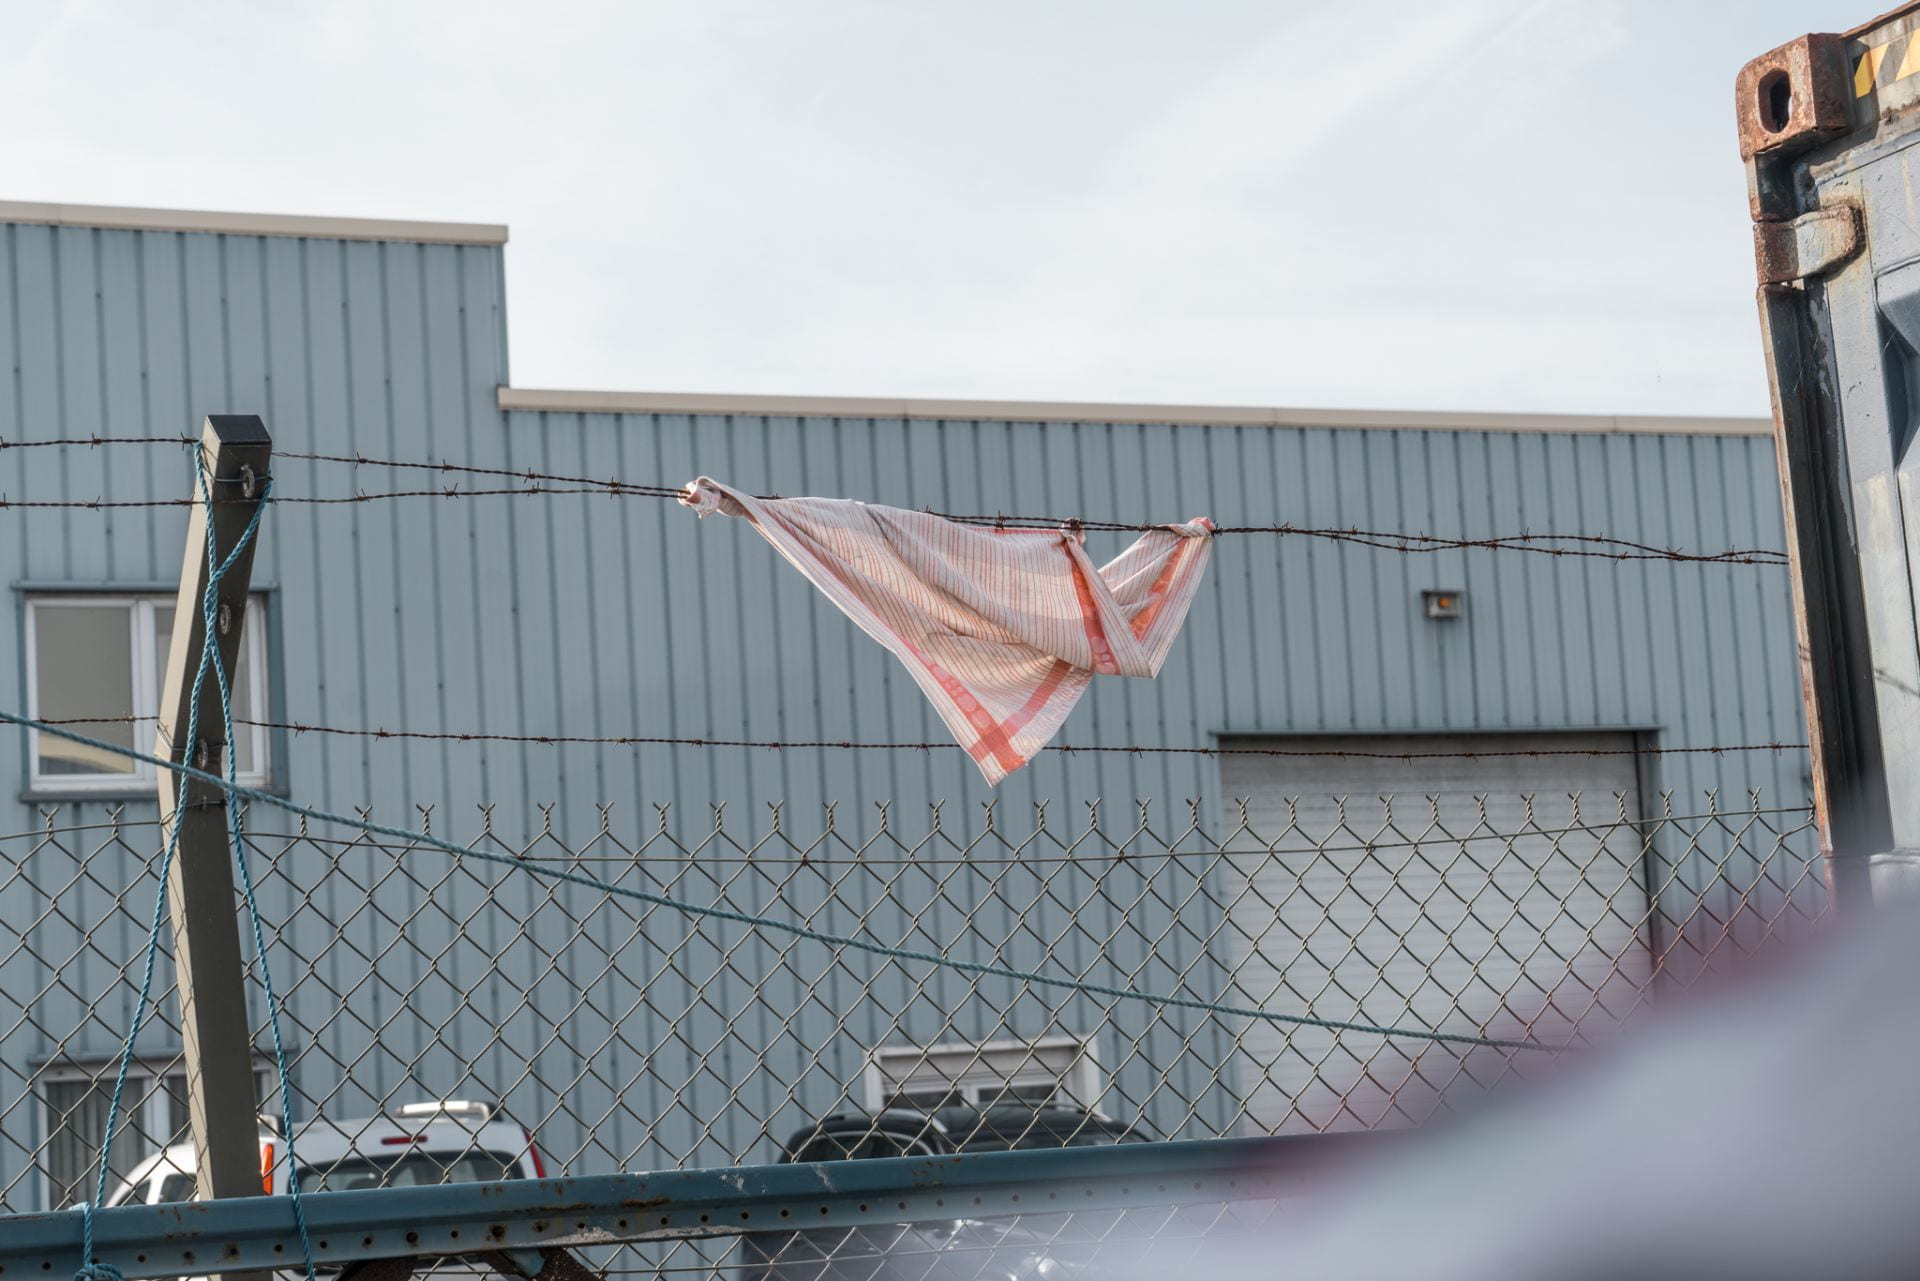 Cloth caught on barbed-wire fence in front of Warehouse.